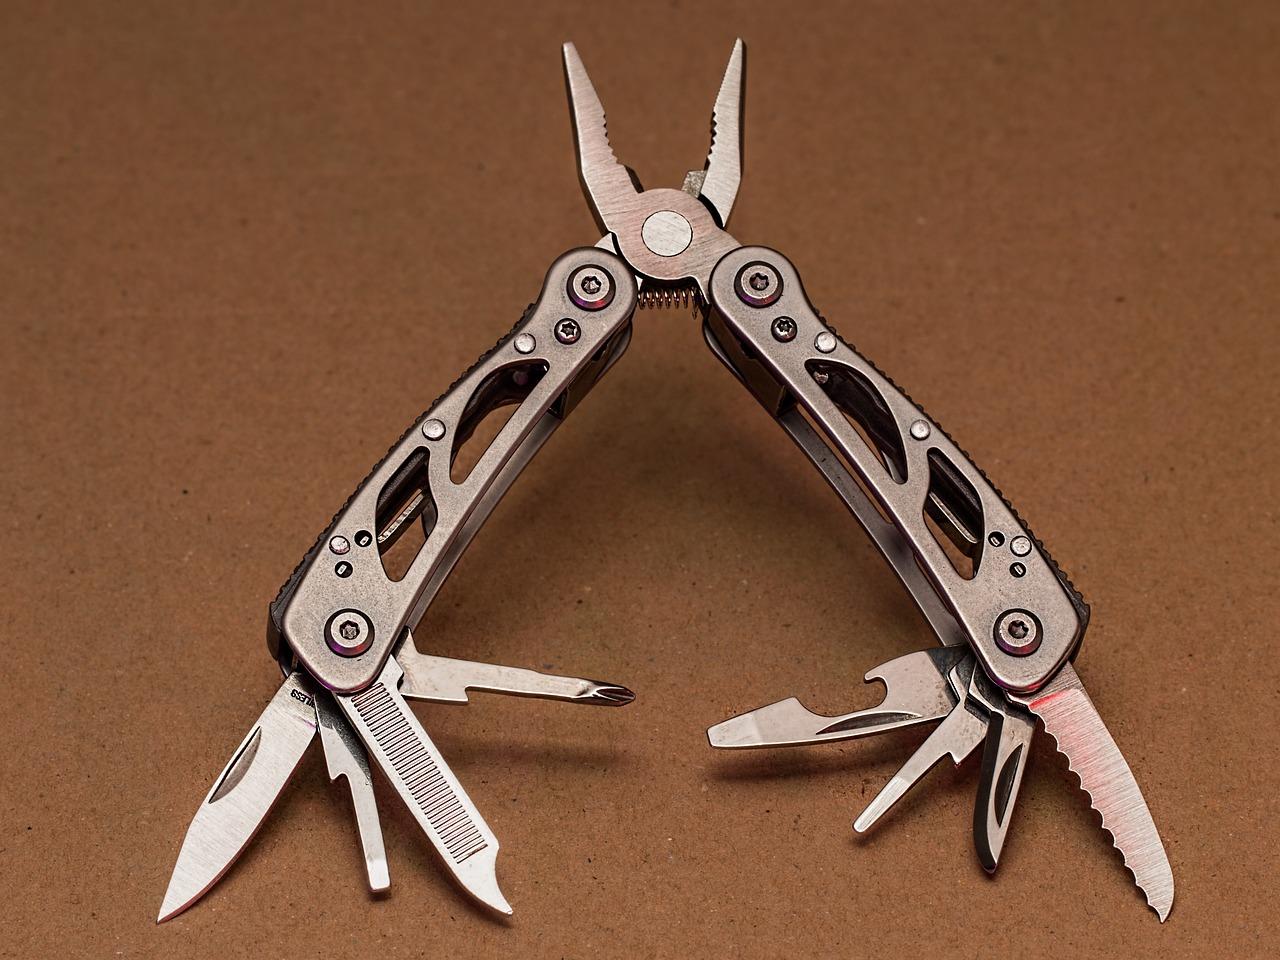 Can you have more than 1 Multi-Tool 